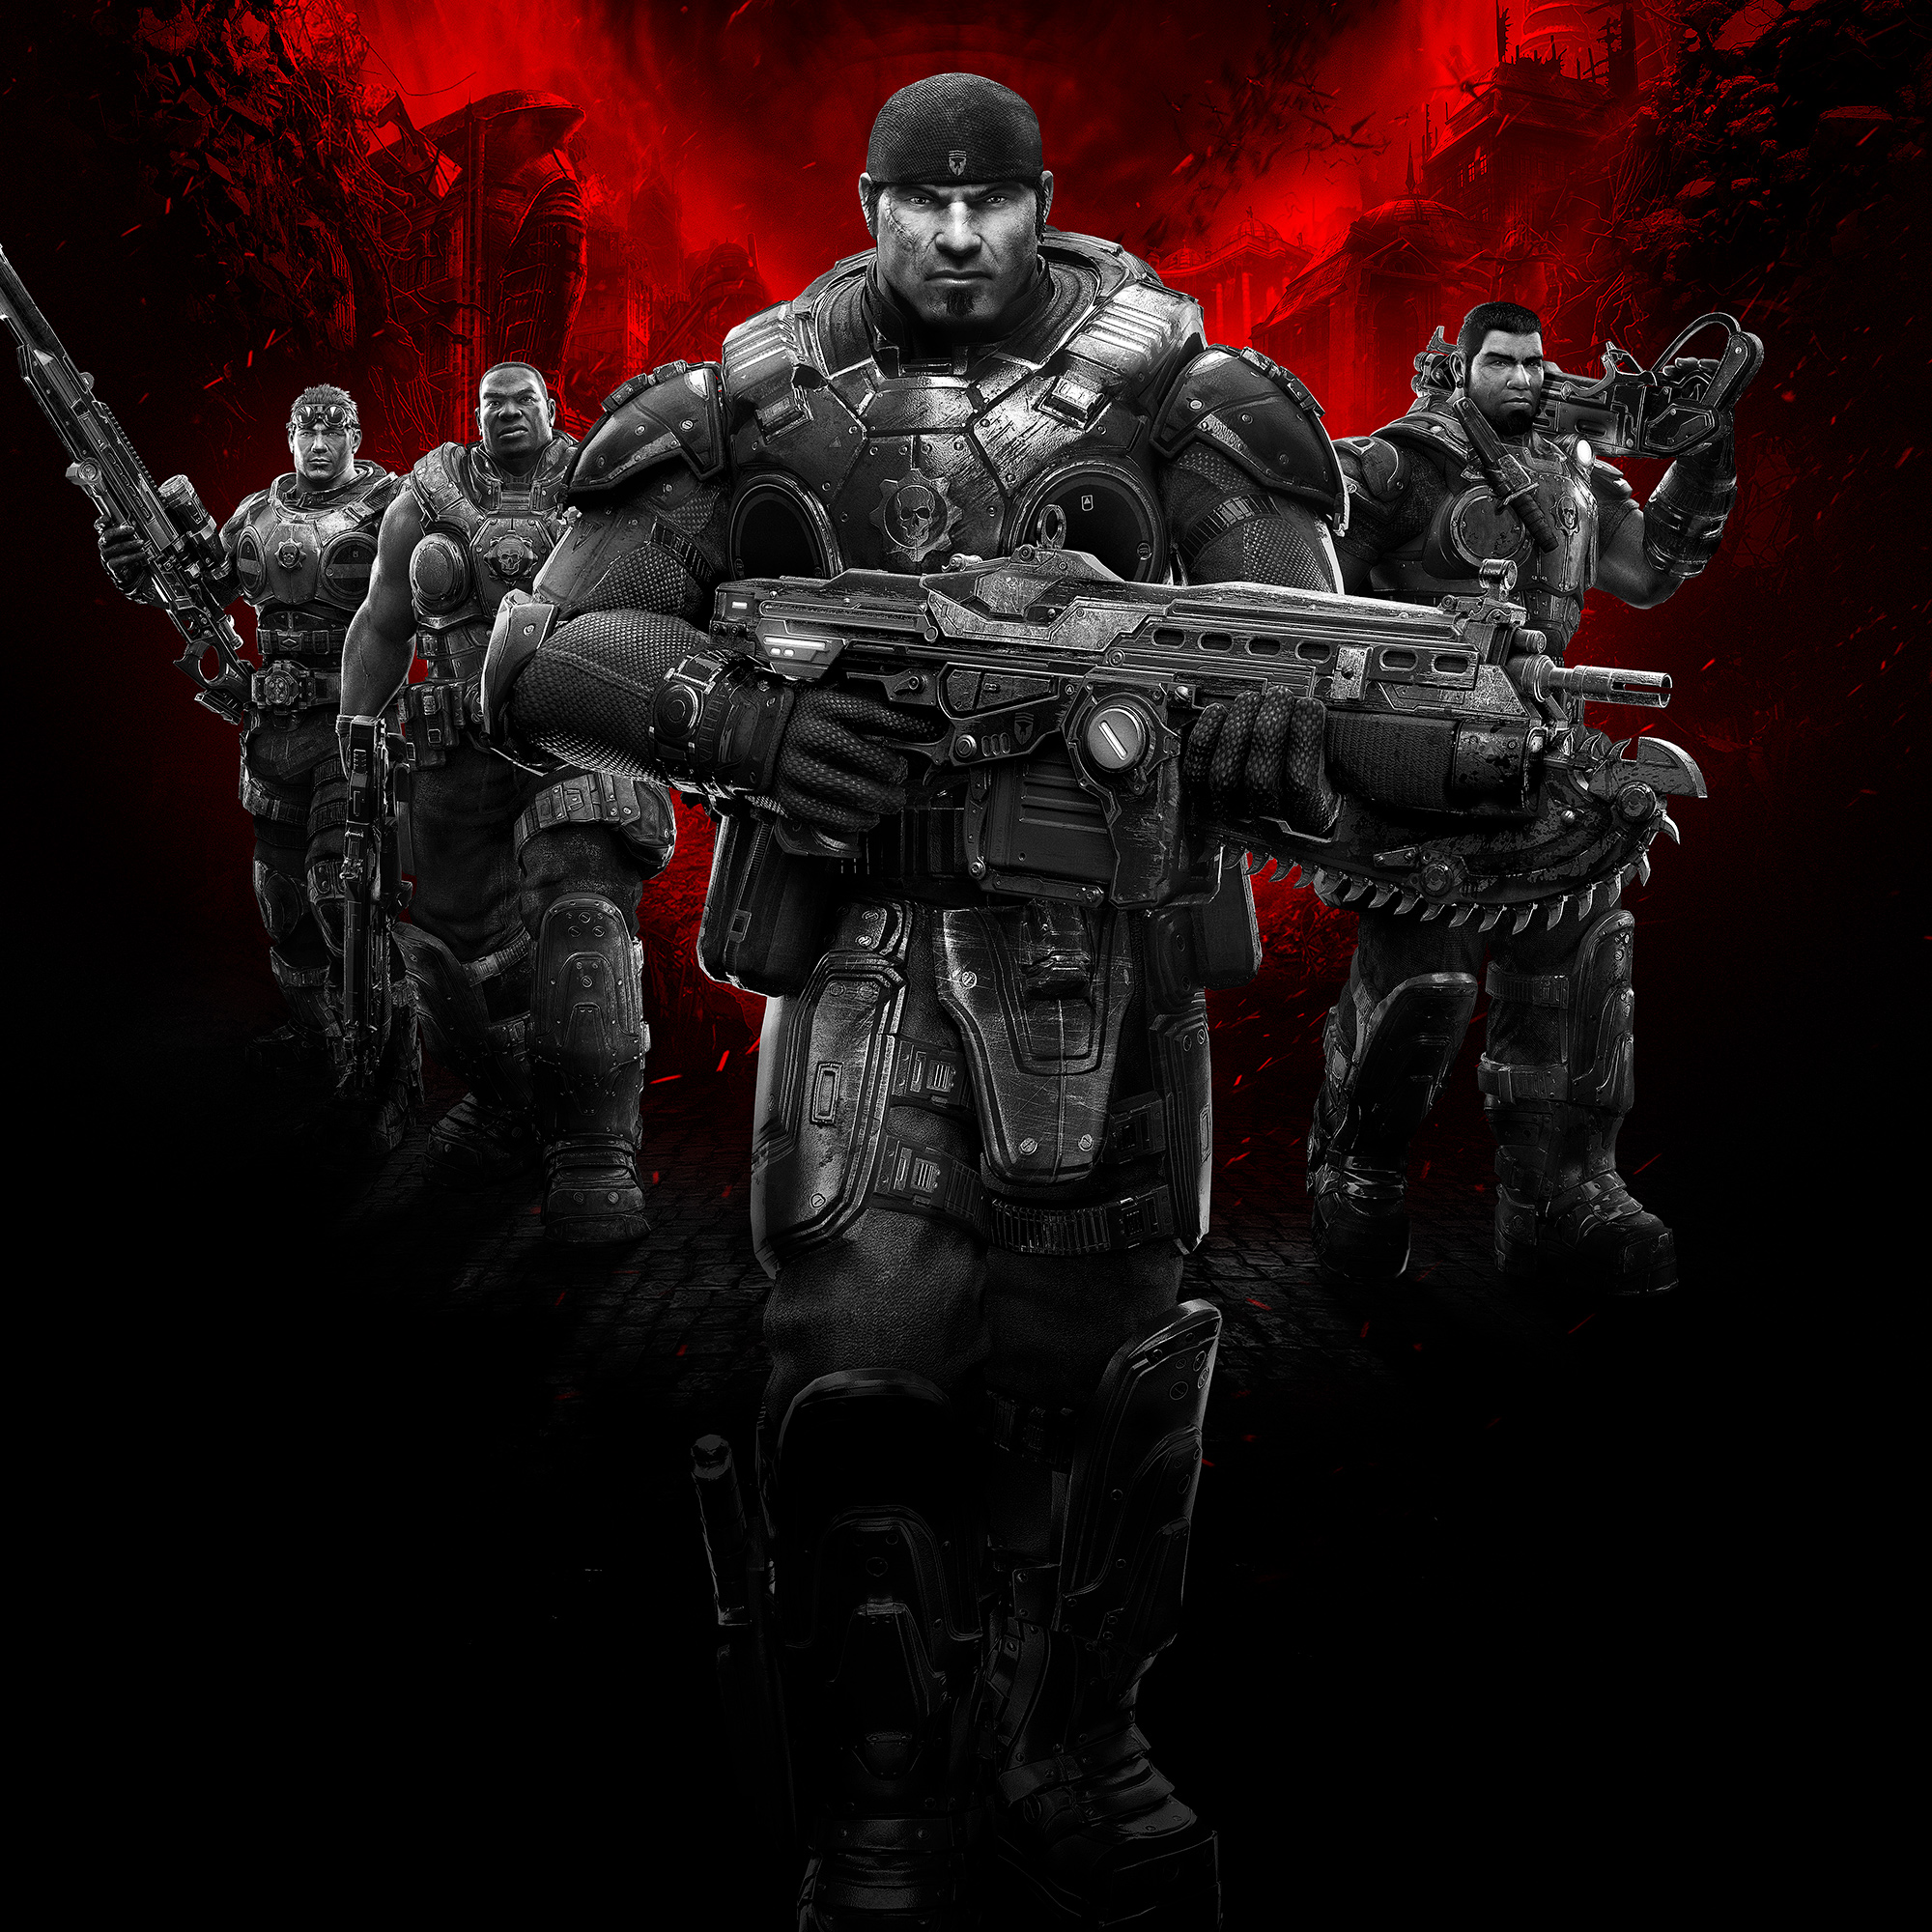 Gears of War: Ultimate Edition Microsoft Xbox One 0885370949896 